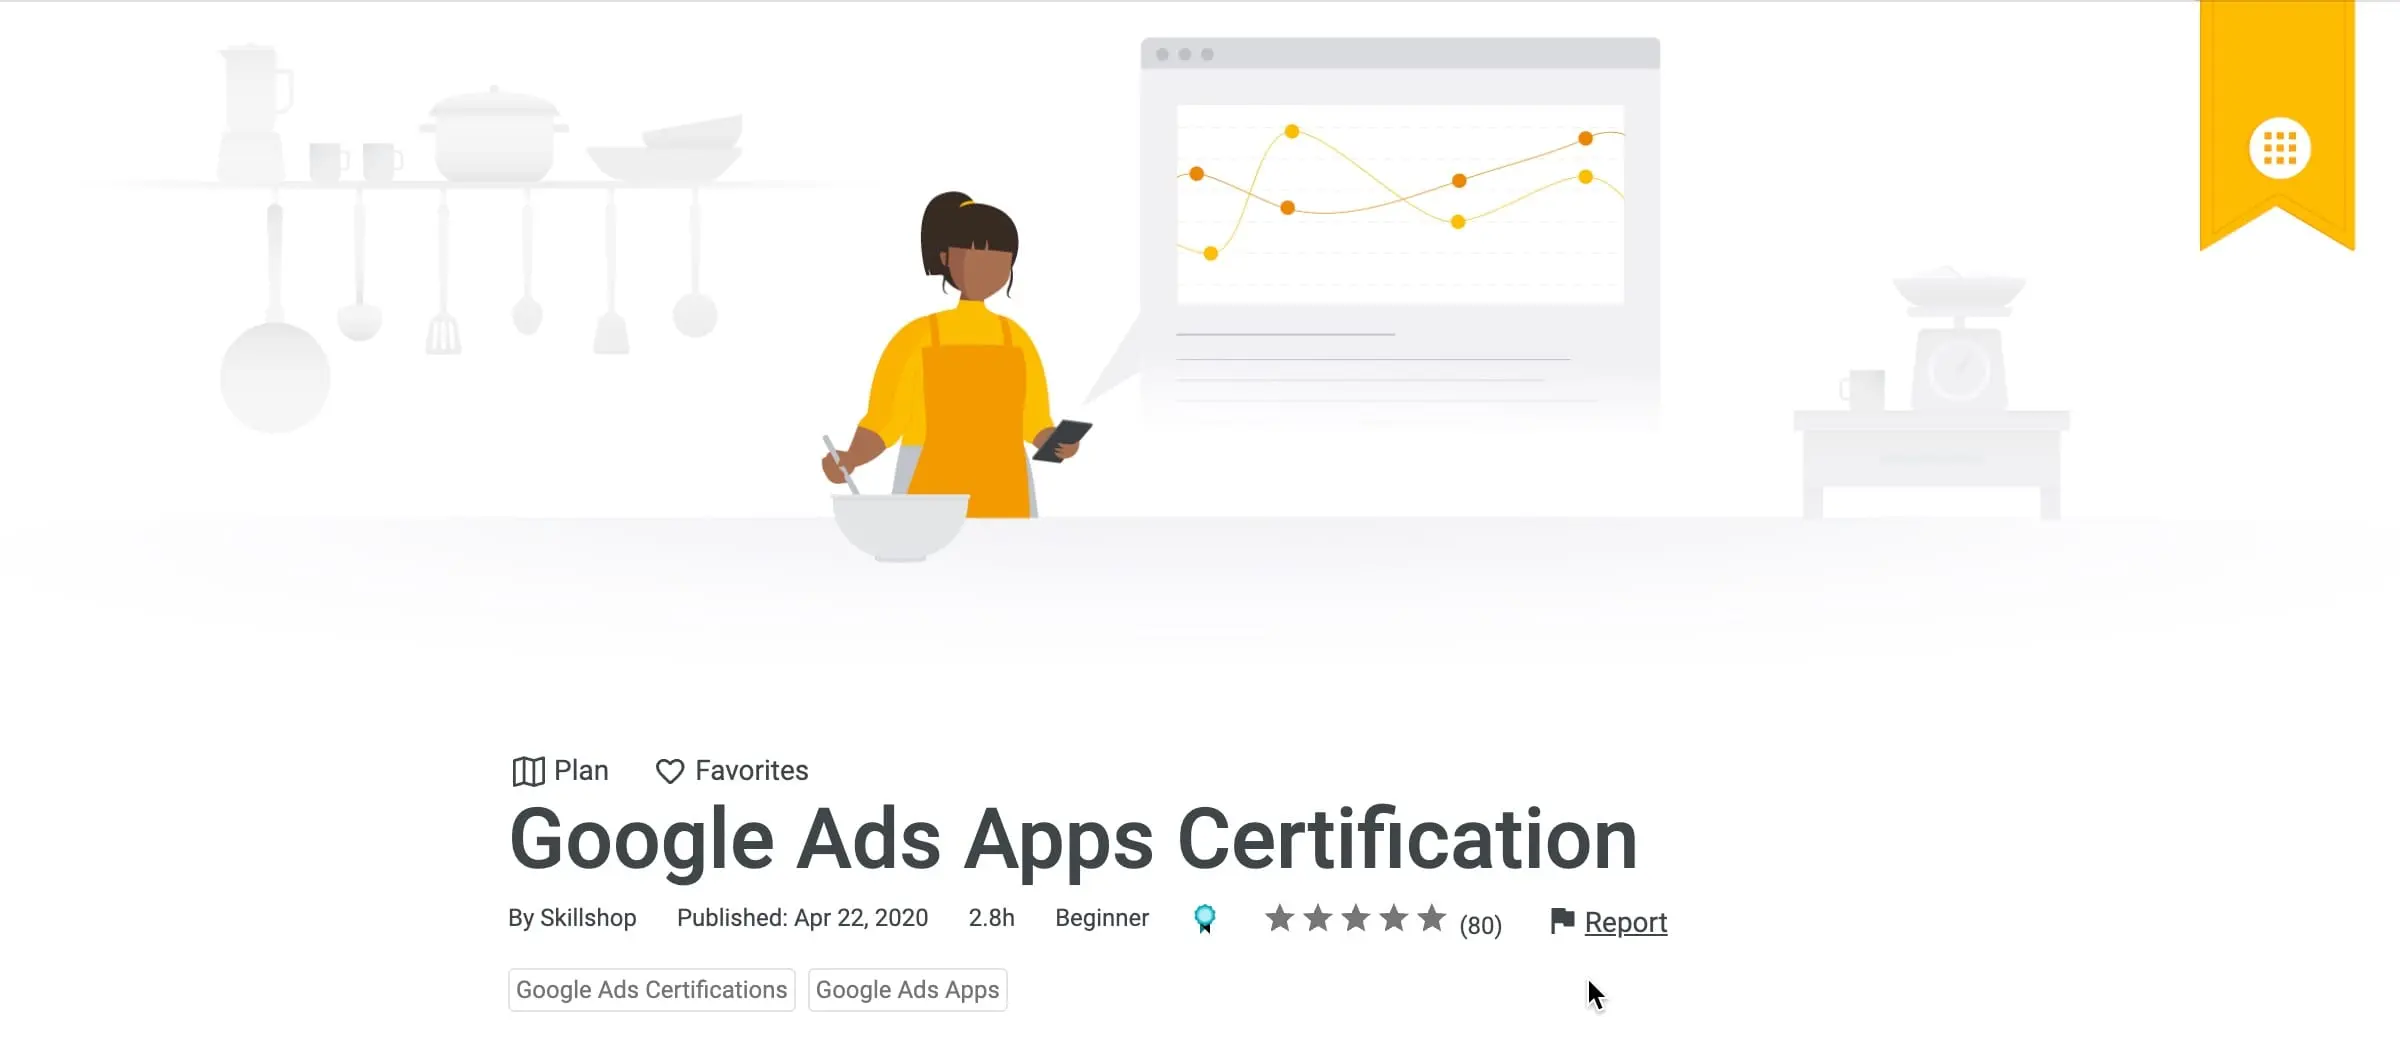 Google Ads Apps Certifications